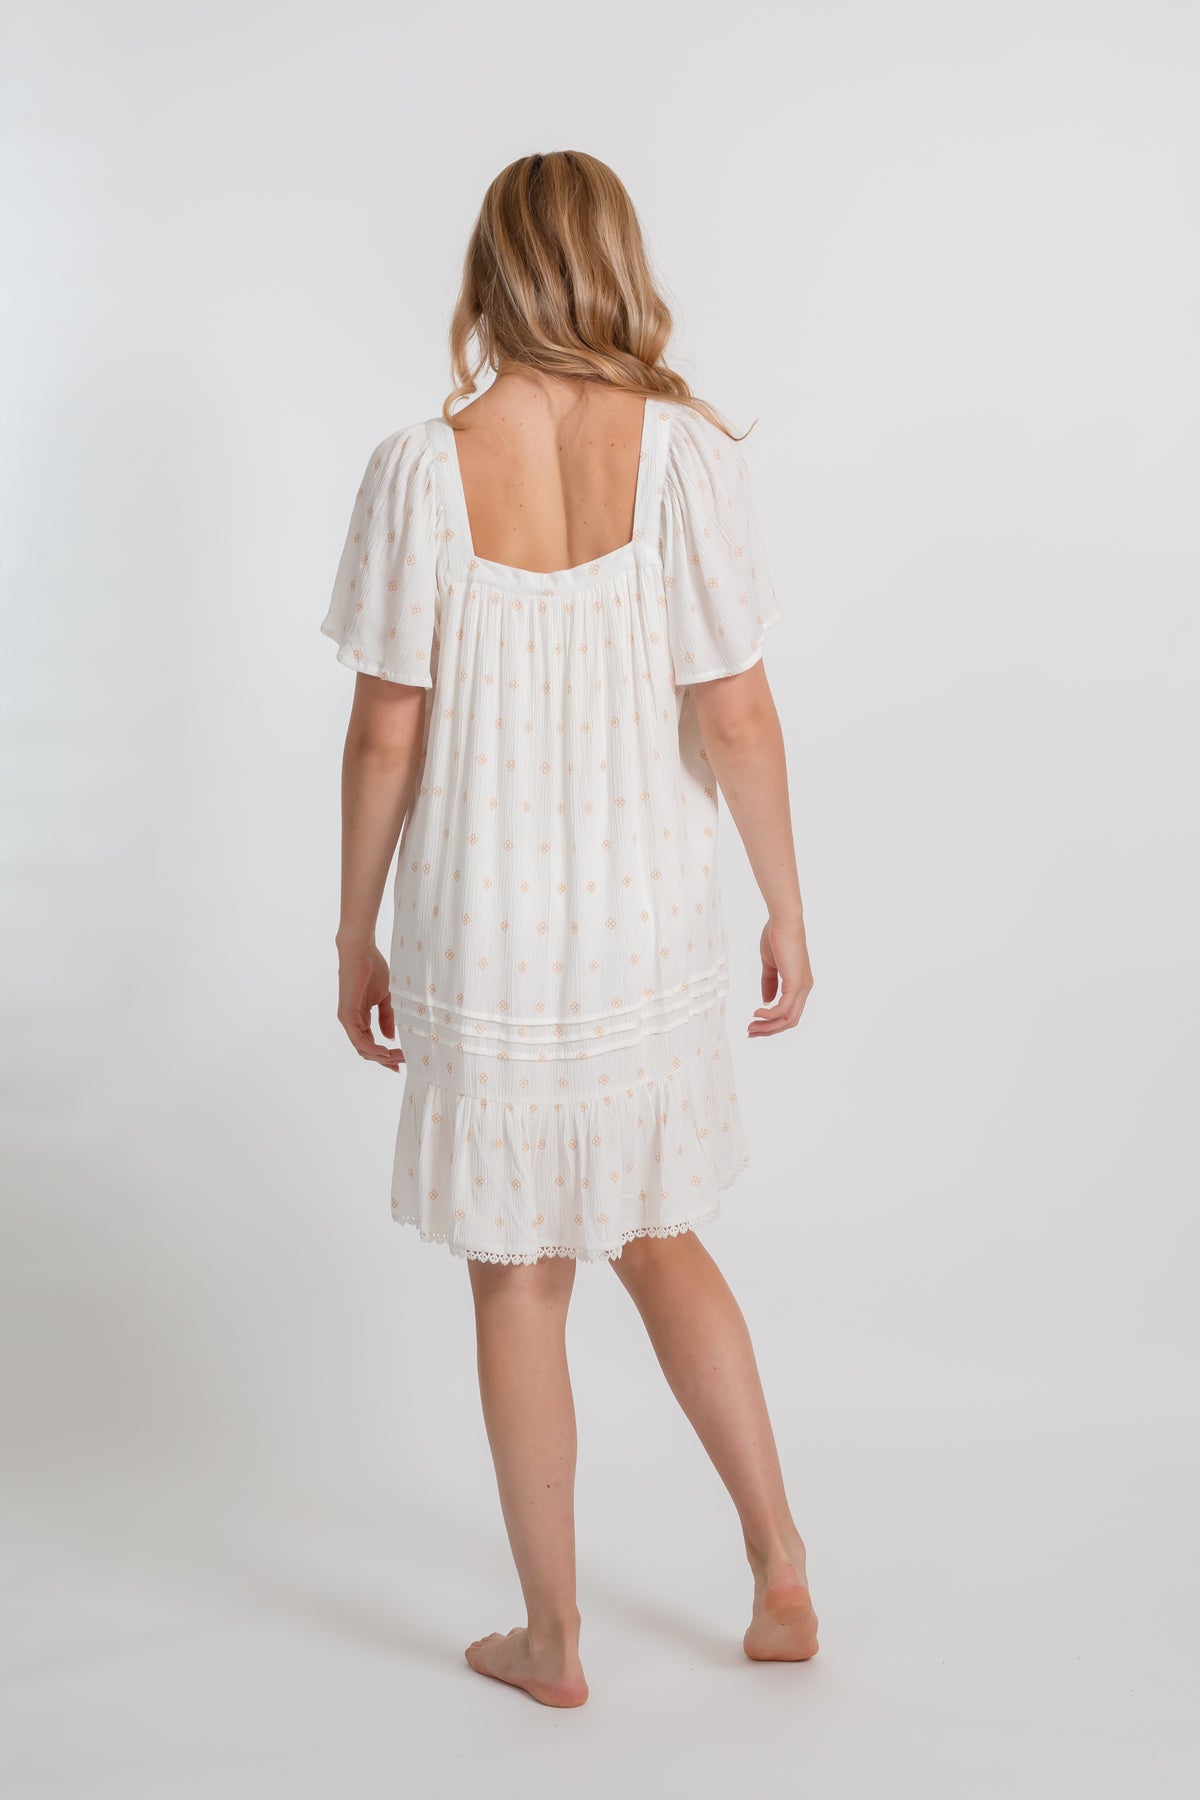 the back of a blonde hair woman wearing white with gold dot print vacation style beach dress